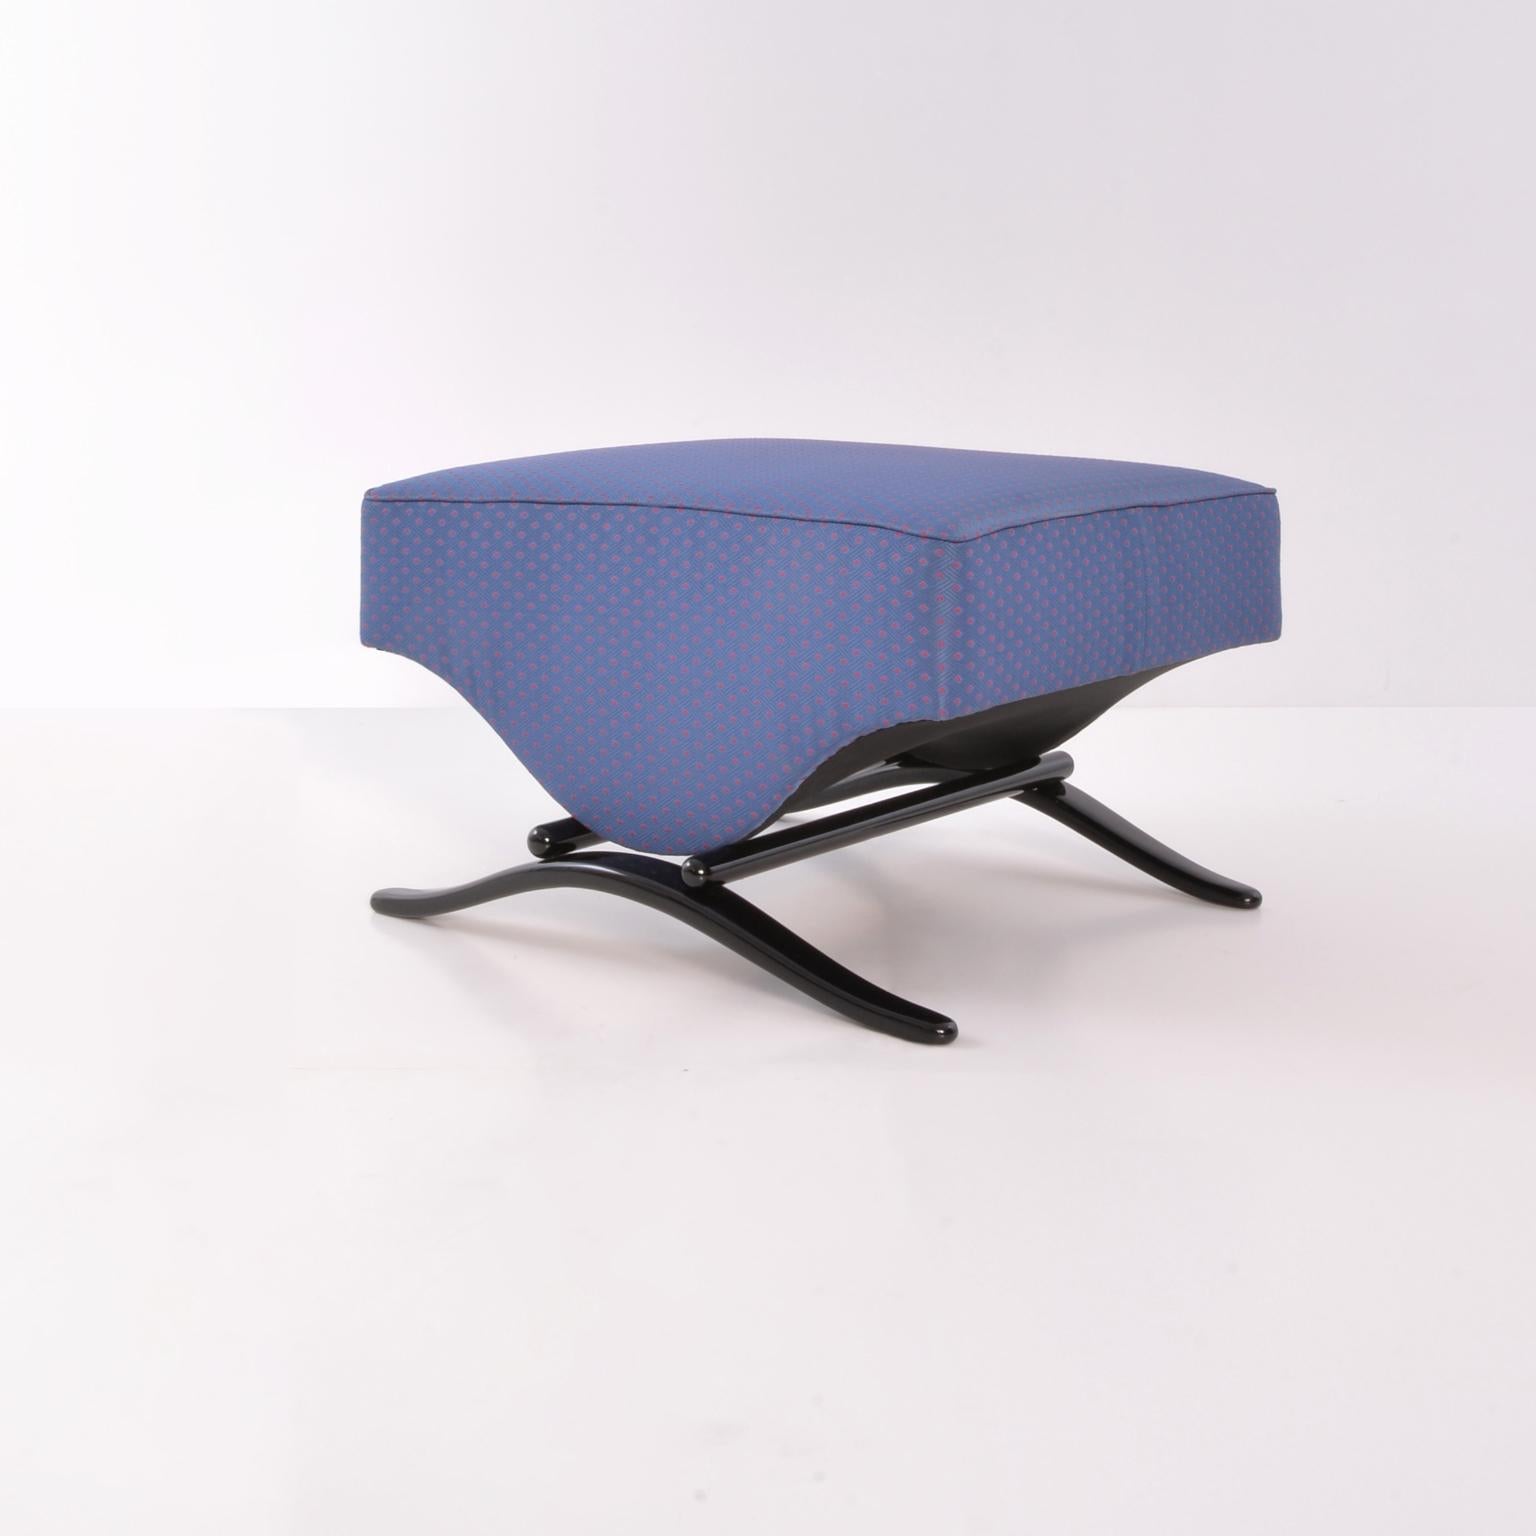 Bespoke modernist stool designed and manufactured by GMD Berlin - Studio.

Individual selection of leather and fabric covers, wood lacquering in various colors and finish. Available on request in different amounts, delivery time: 6-8 weeks.